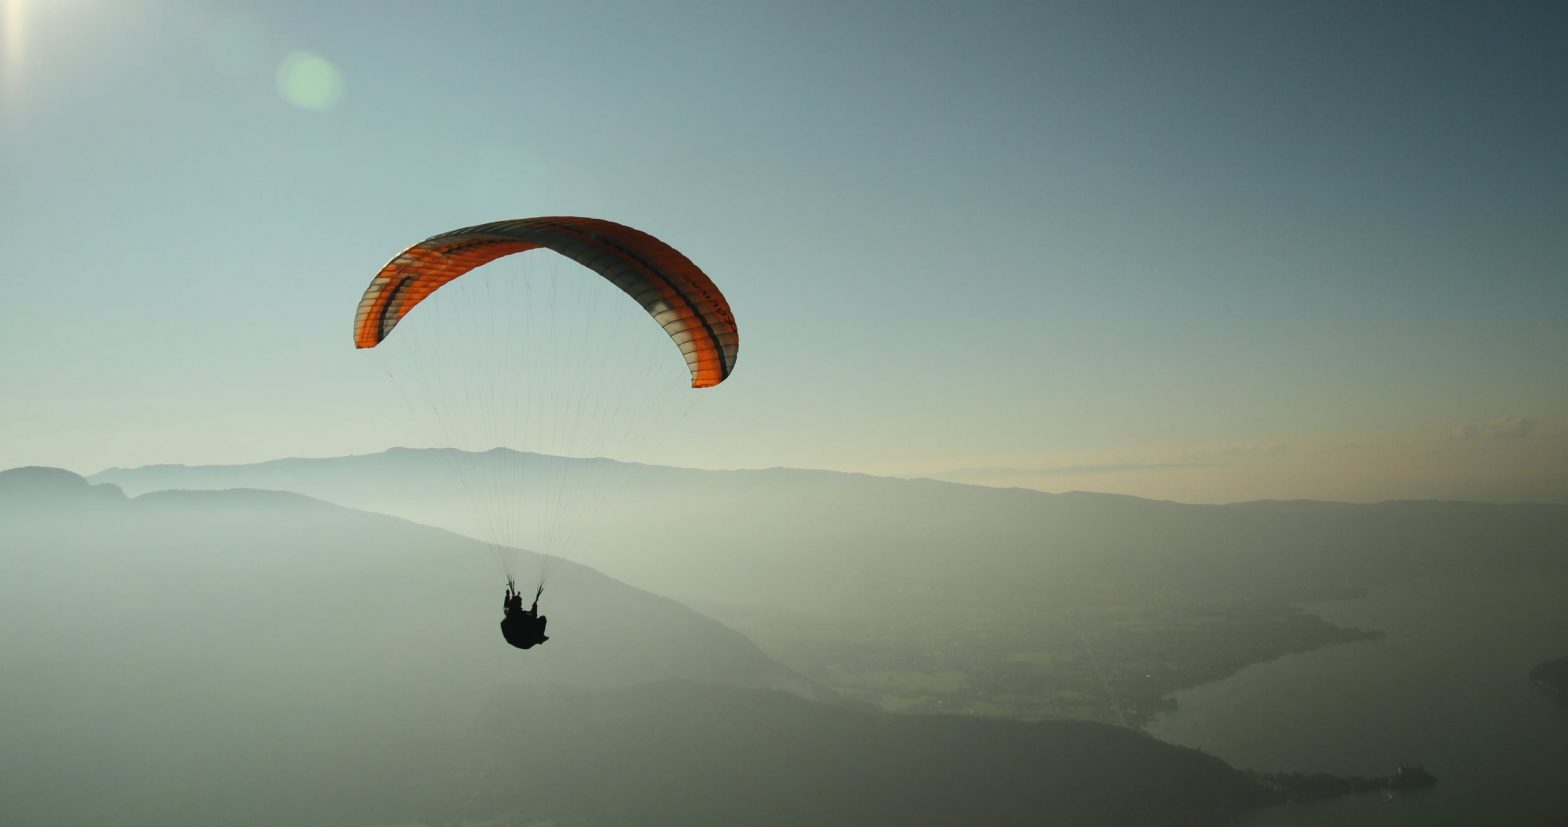  Paragliding – as one of the spectacular types of flight.